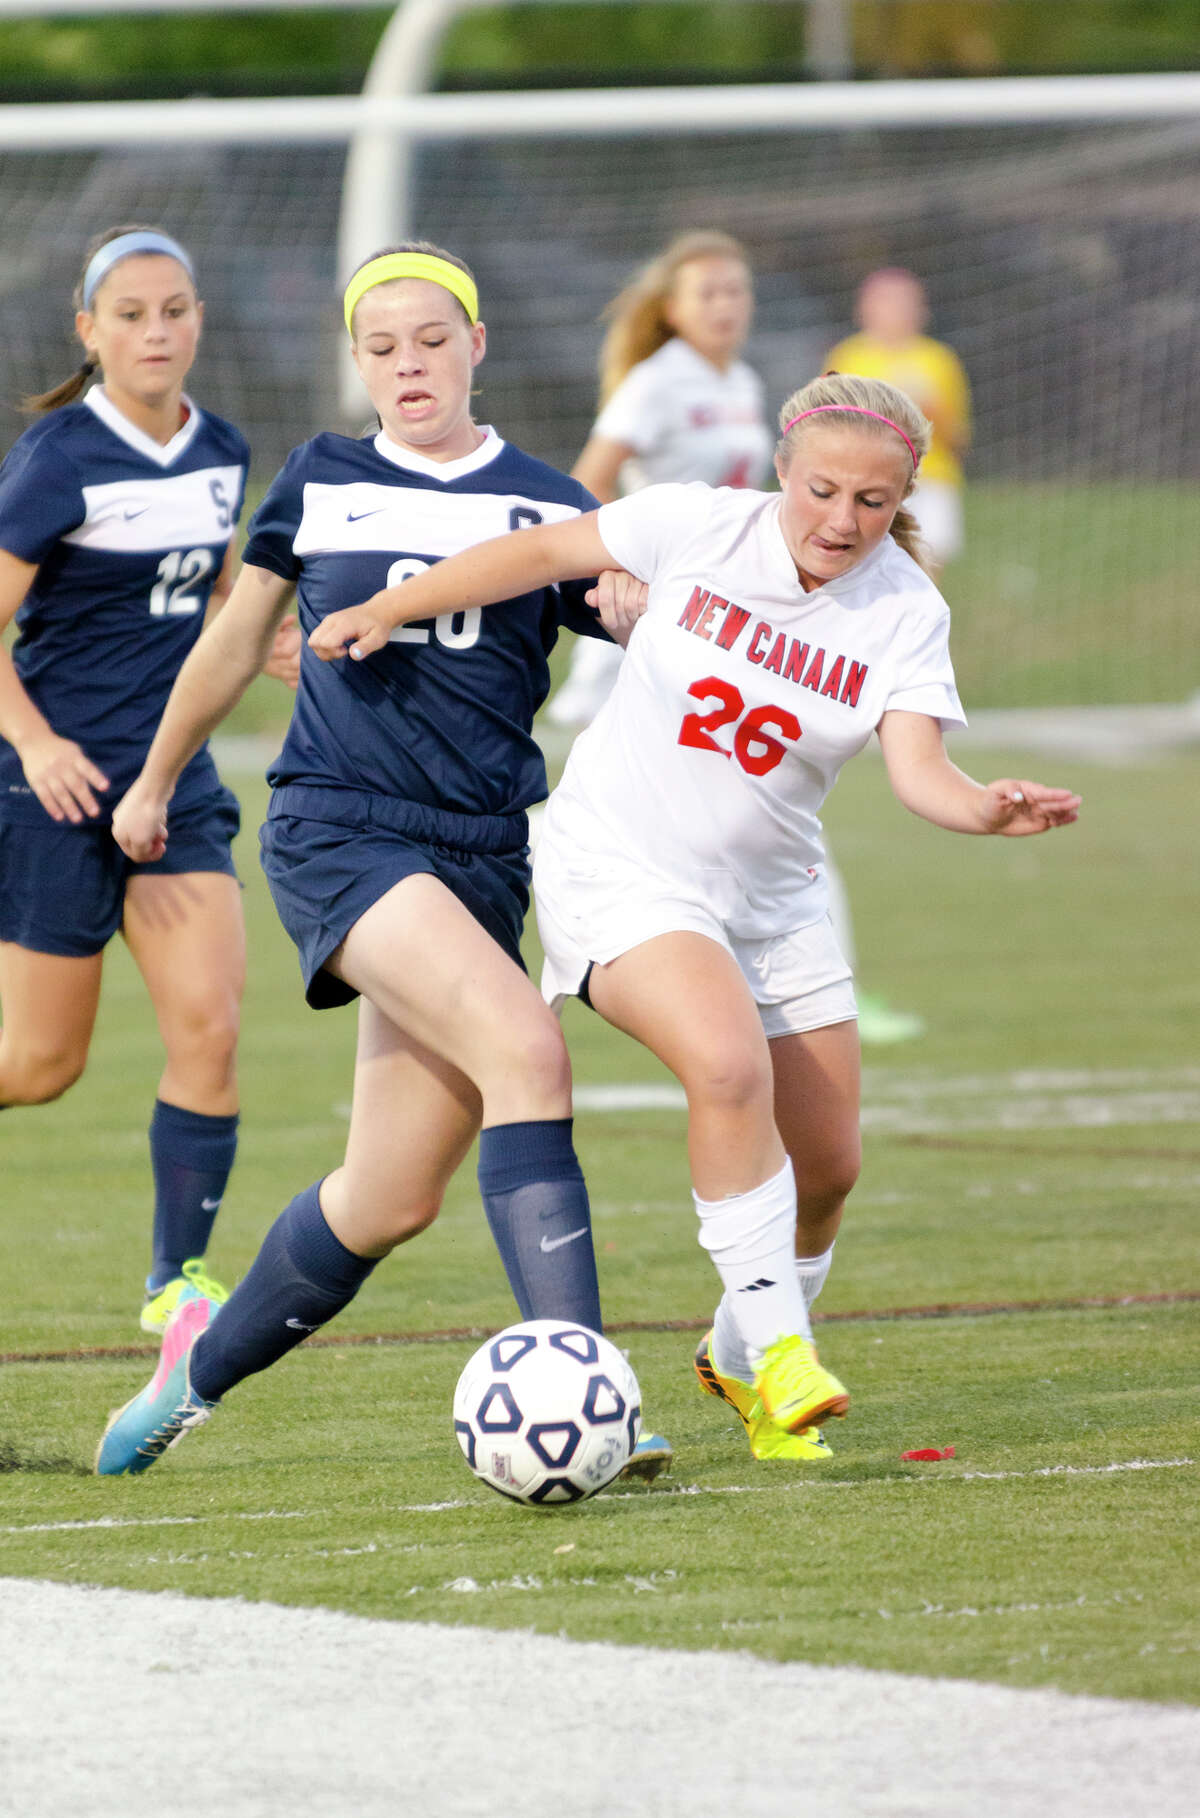 New Canaan's Courtney Overacker and Staples' Charlotte Rossi battle for control of the ball during the girls soccer game against Staples High School at New Canaan High School on Wednesday, Sept. 25, 2013.